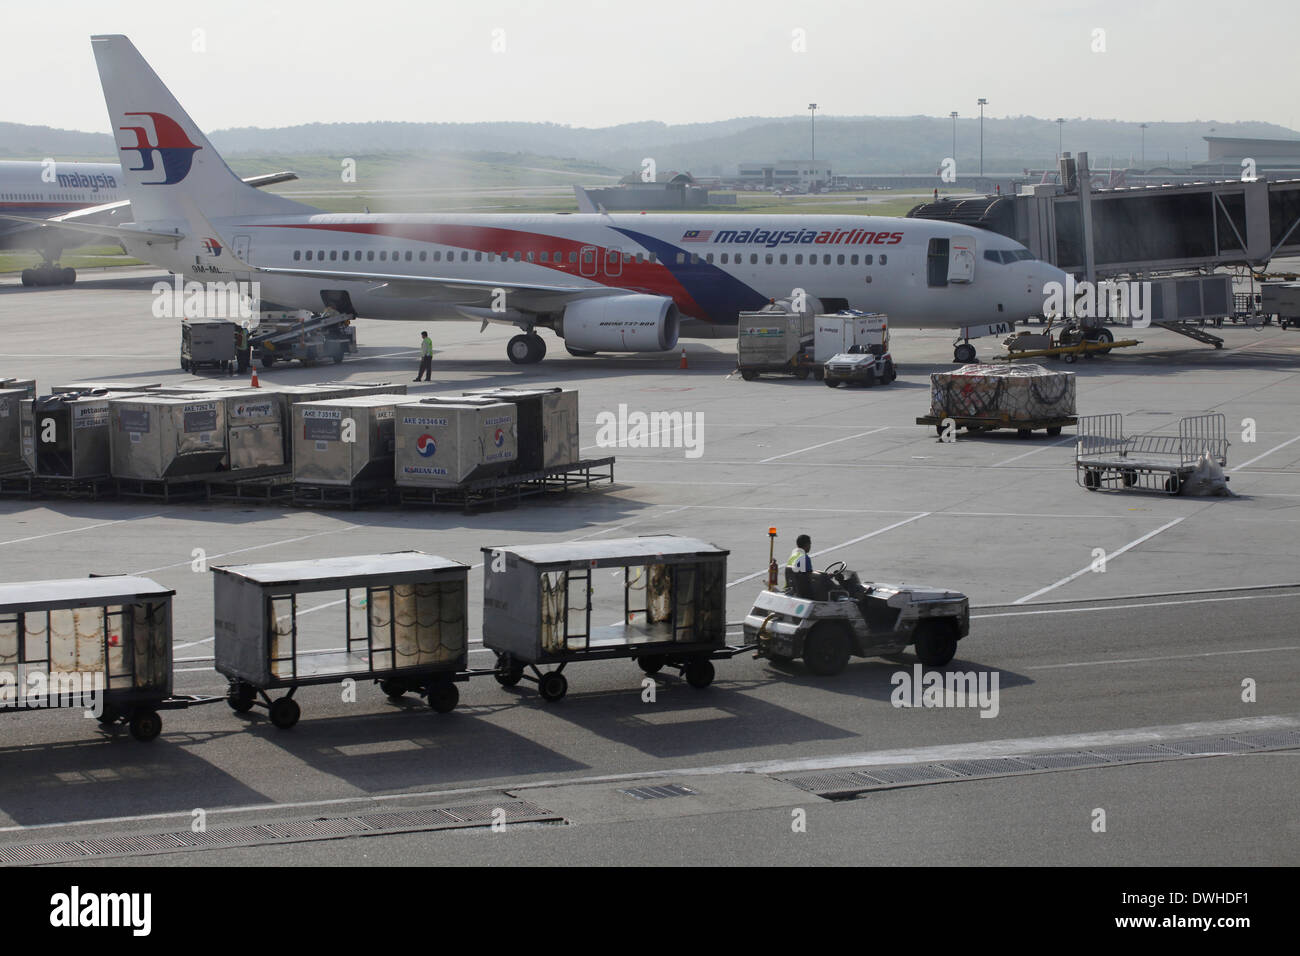 Malaysia Airlines airplanes at Kuala Lumpur airport in Malaysia Stock Photo